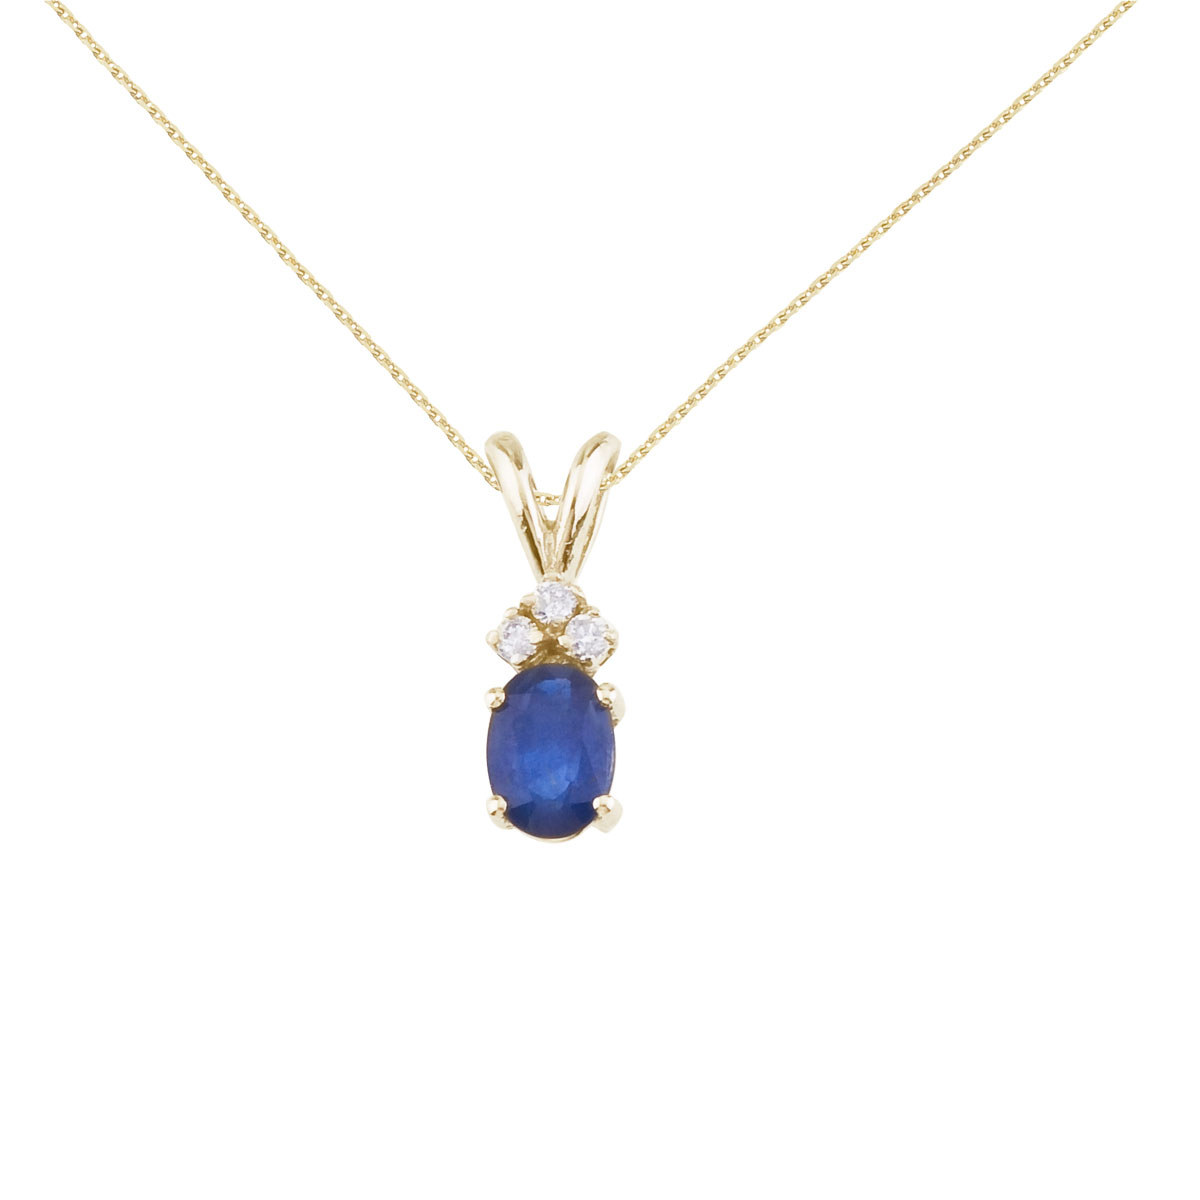 JCX2695: 7x5 mm oval natural sapphire pendant topped with 3 bright diamonds set in 14k yellow gold.